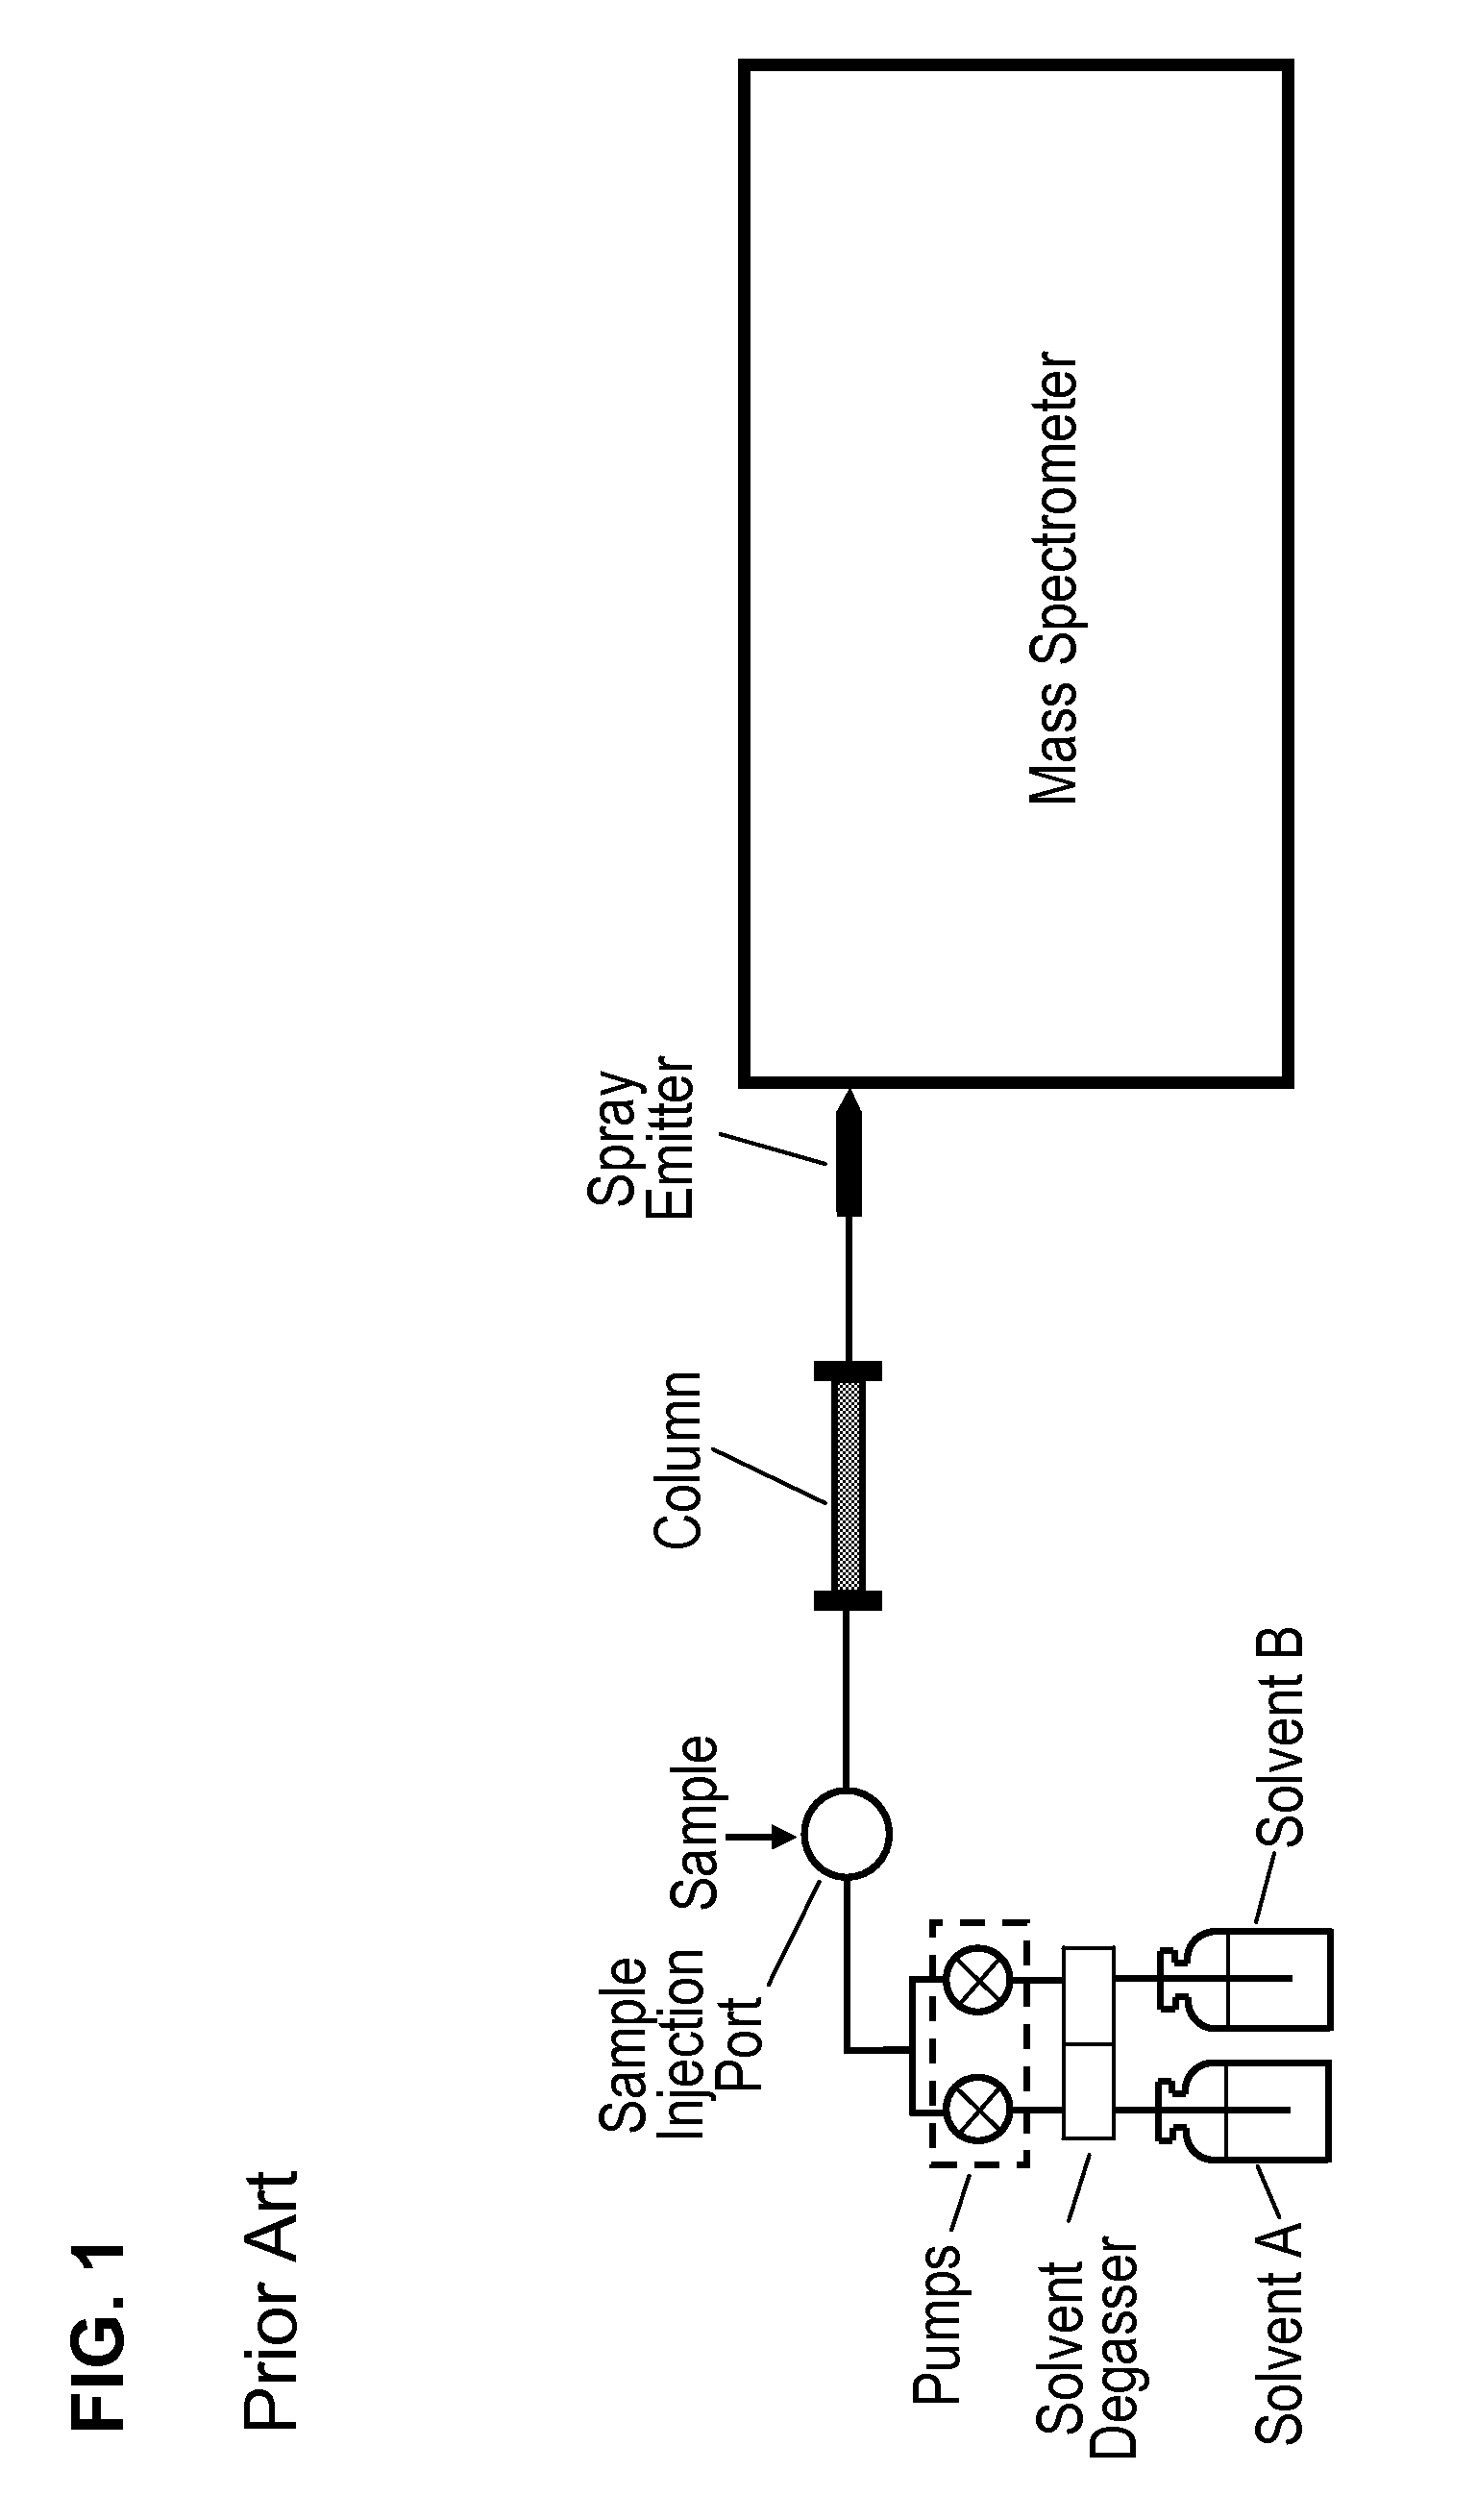 Nanoliter flow rate separation and electrospray device with plug and play high pressure connections and multi-sensor diagnostic monitoring system